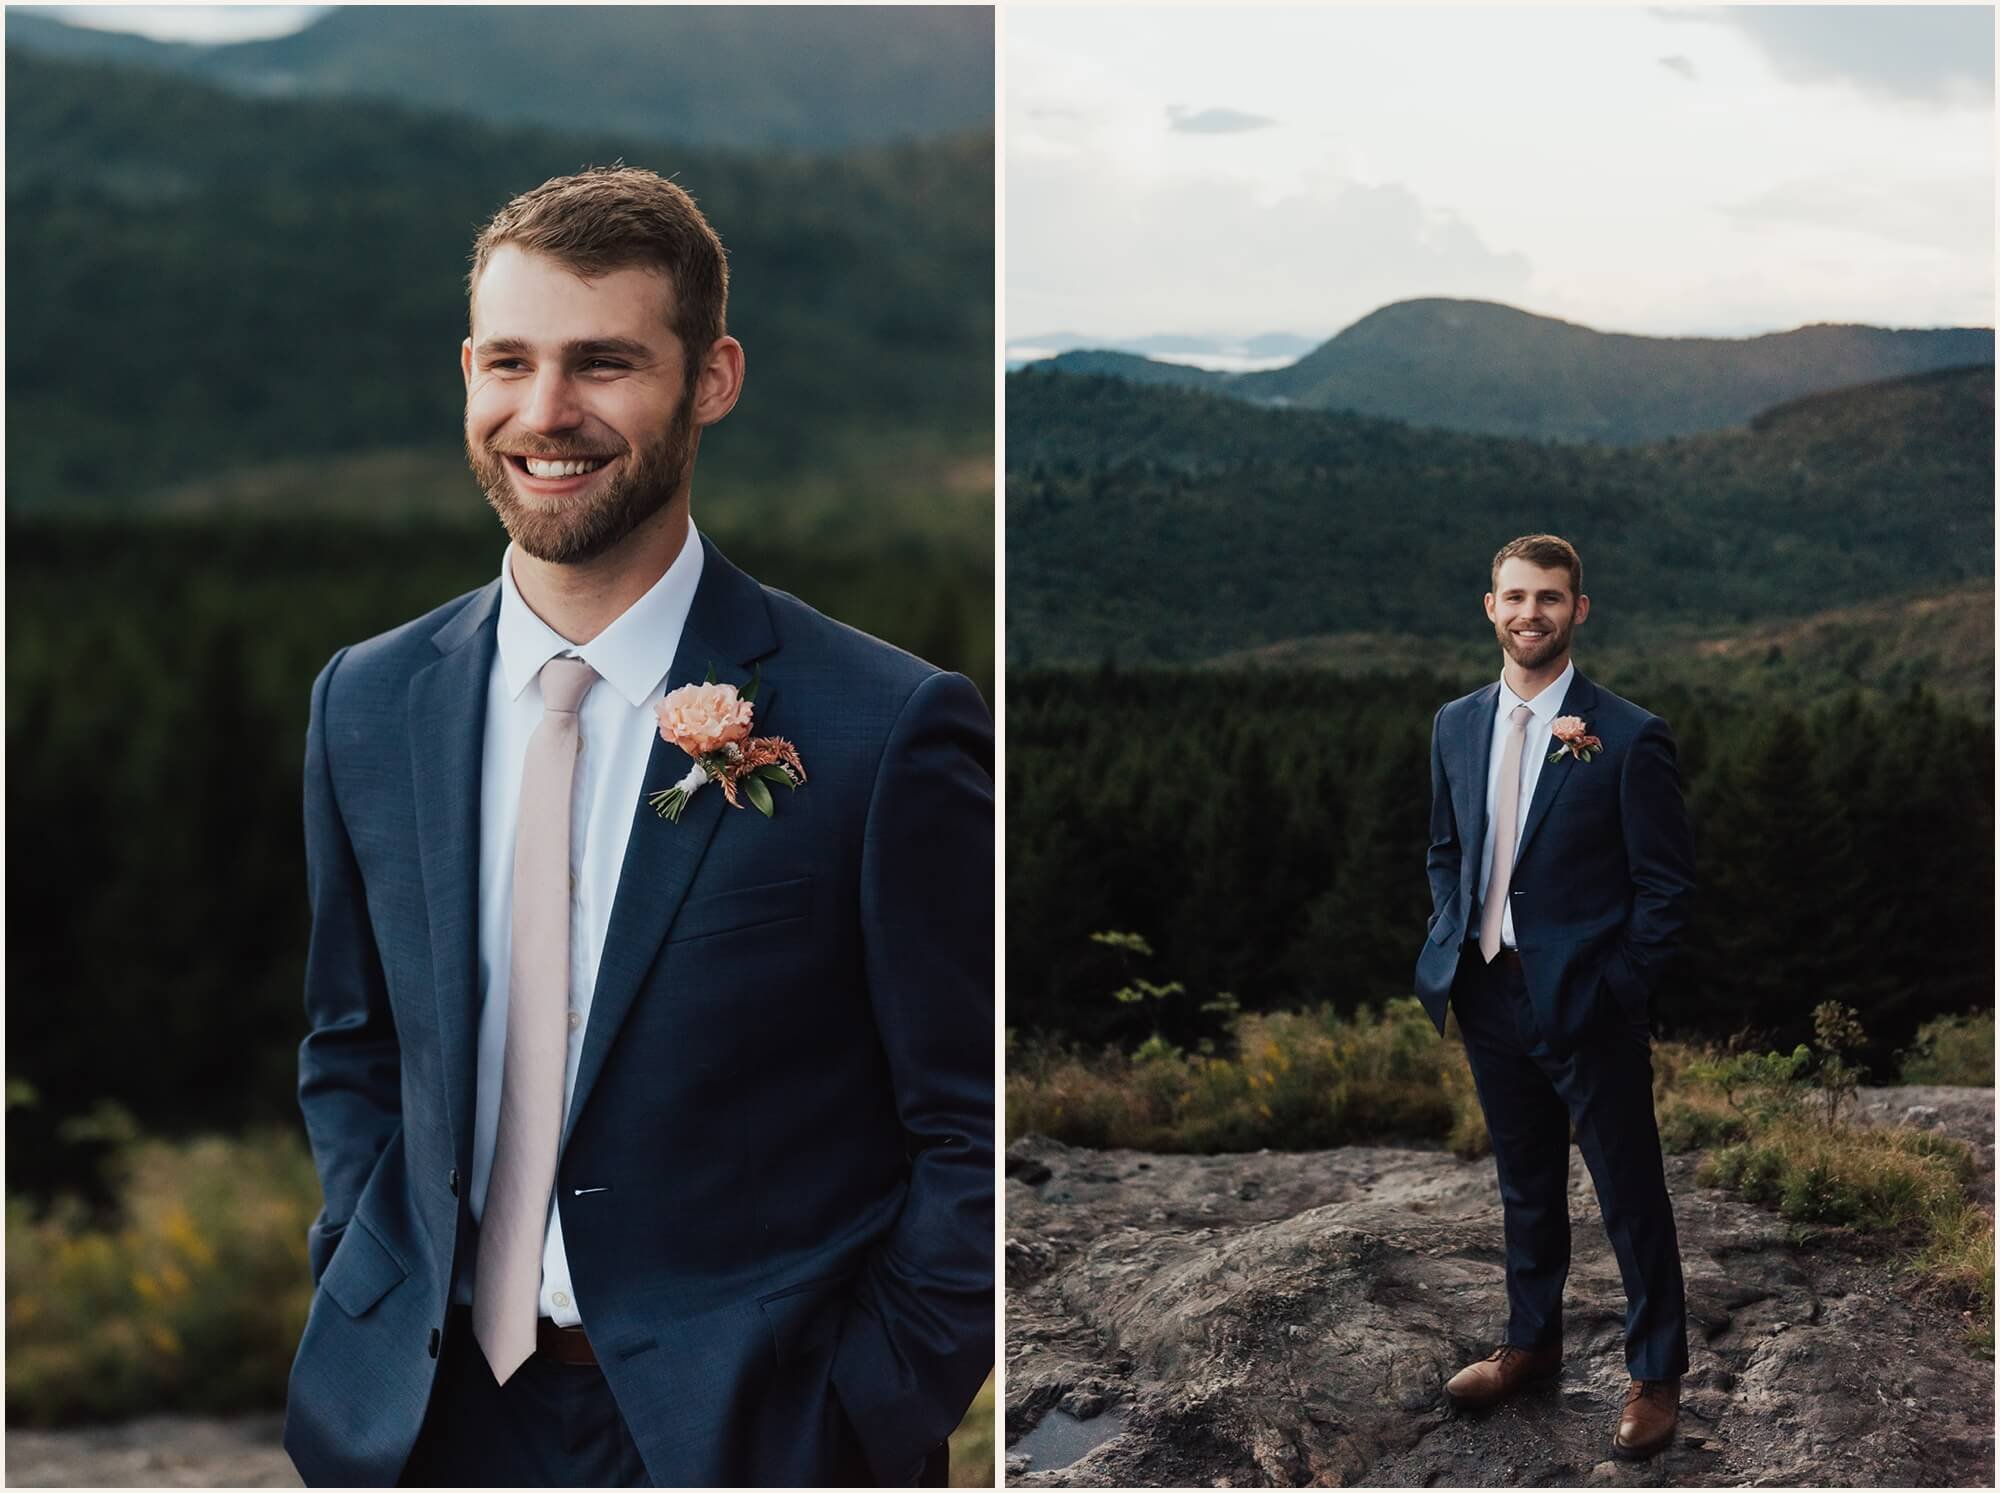 Groom wearing navy suit and light pink tie in the Blue Ridge Mountains